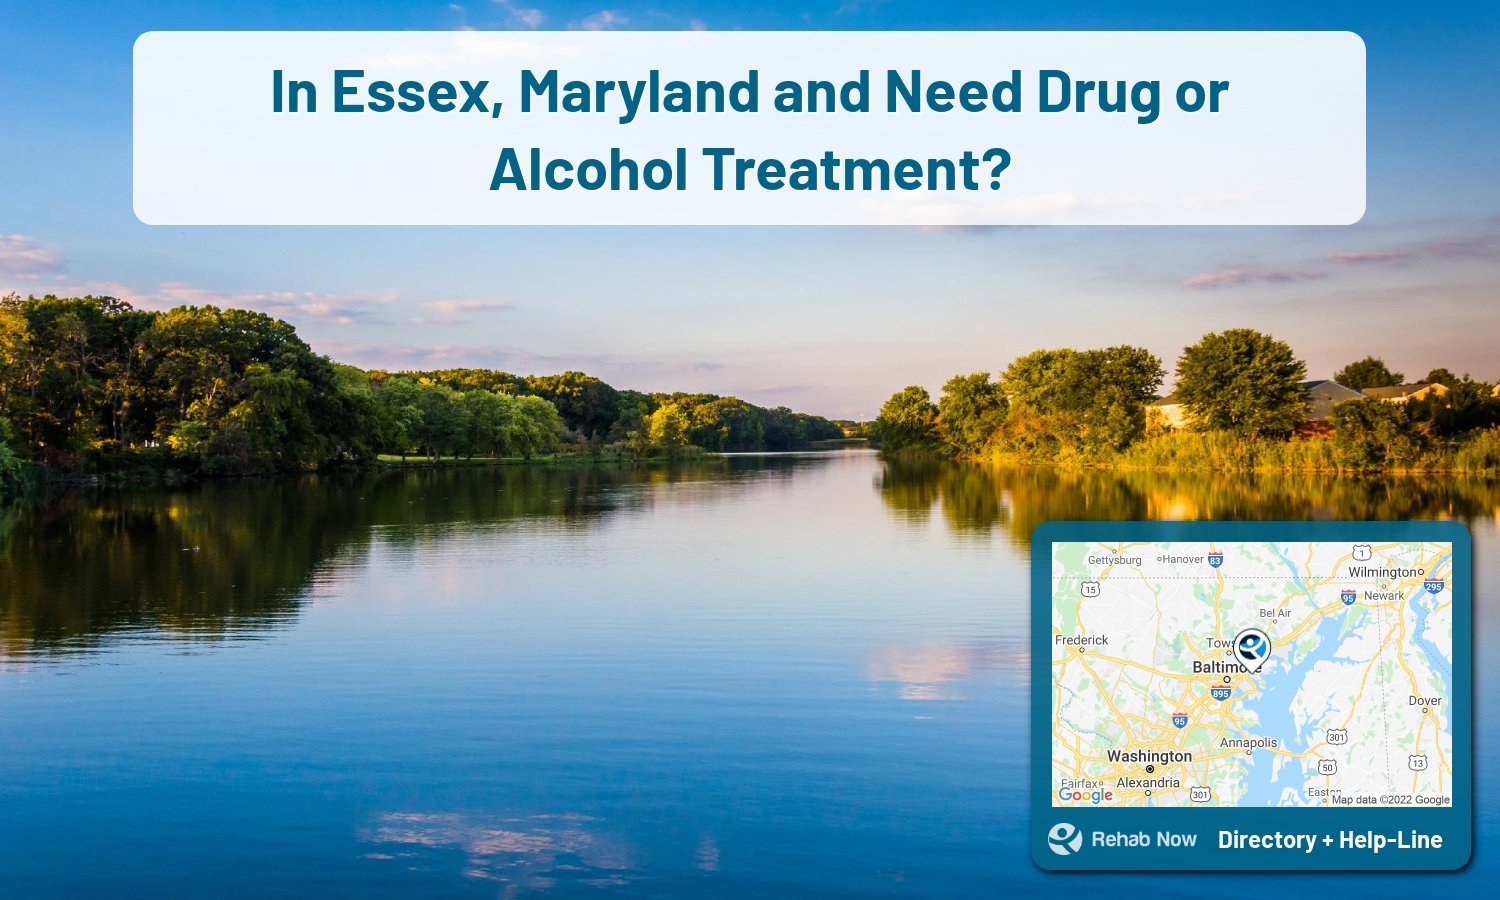 Find drug rehab and alcohol treatment services in Essex. Our experts help you find a center in Essex, Maryland